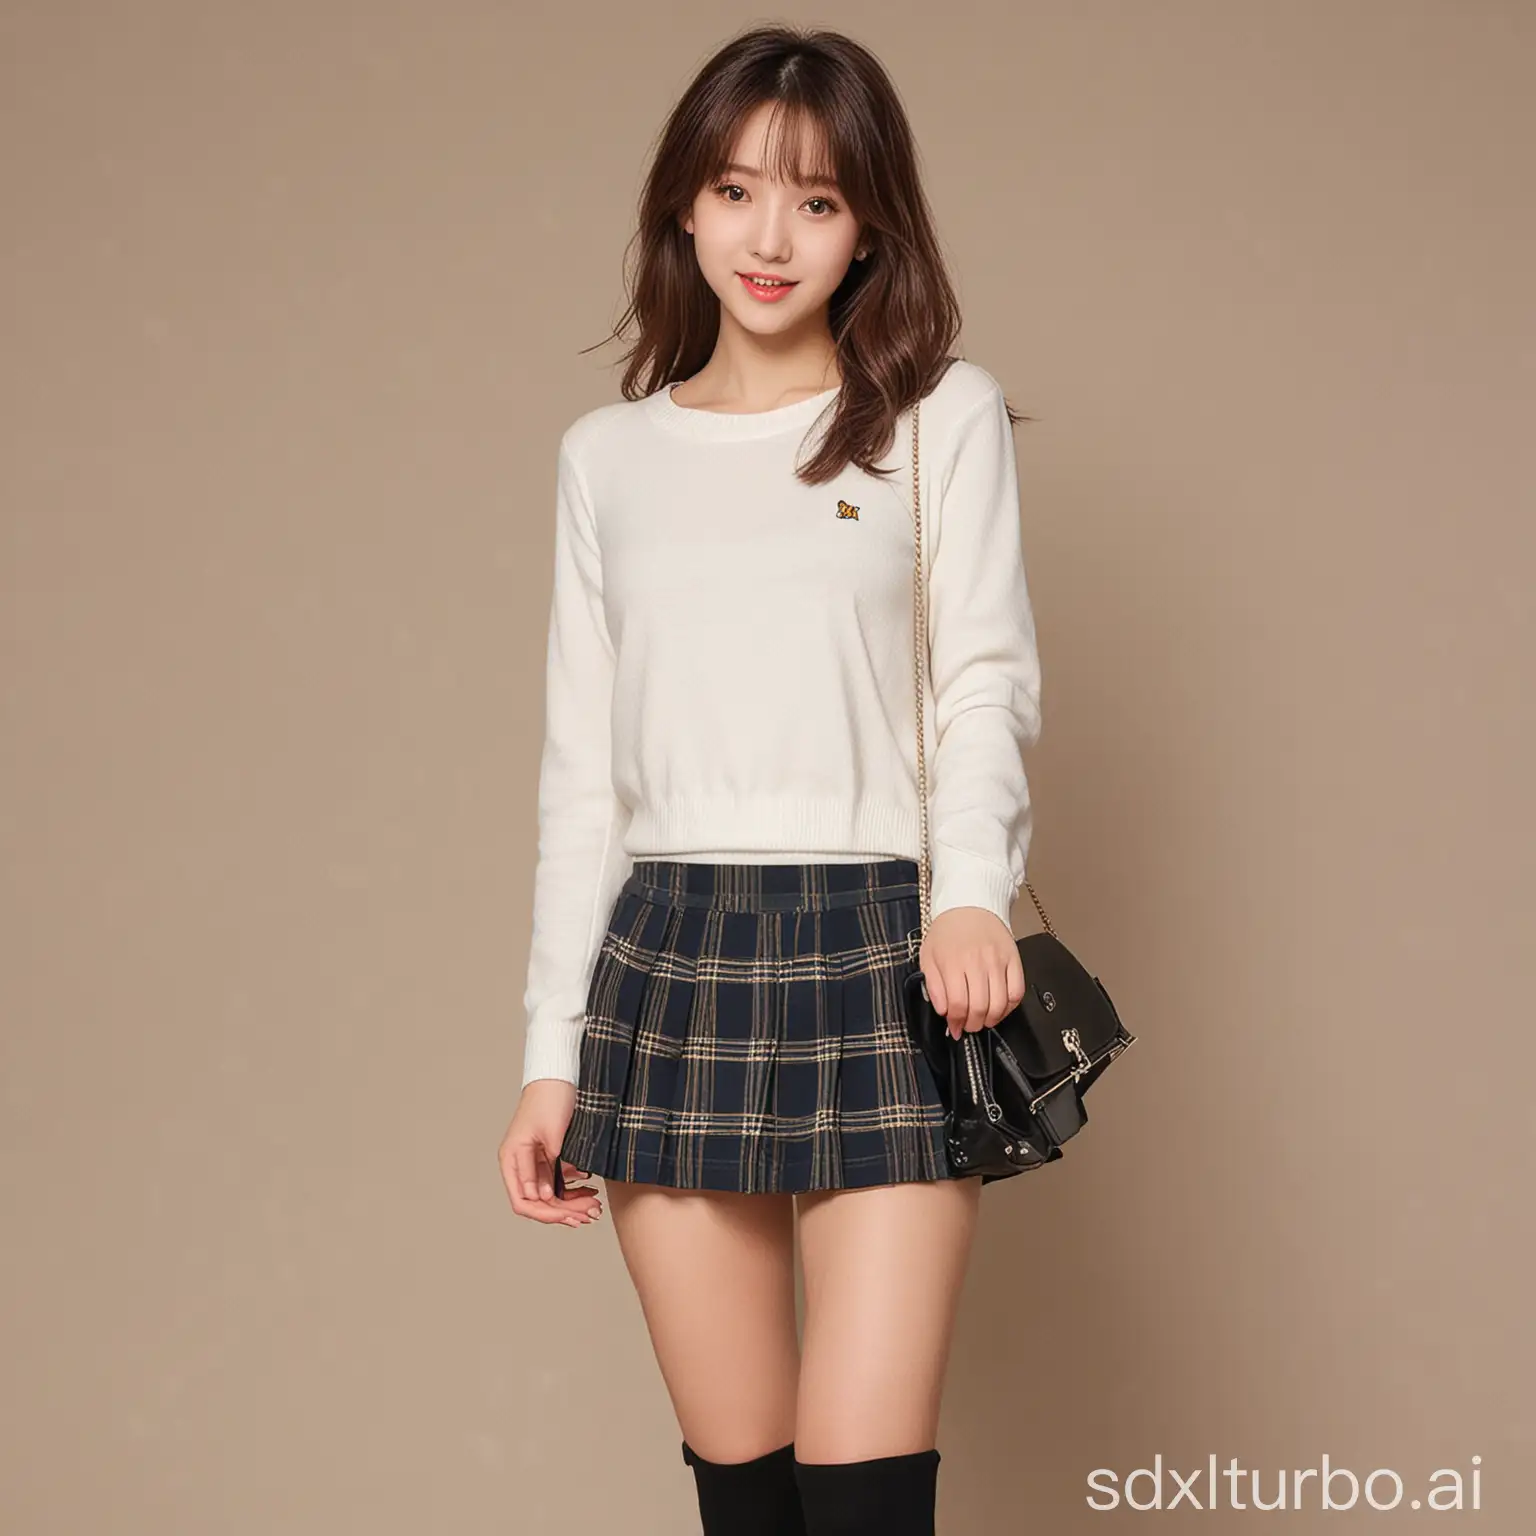 Adorable-Girl-in-JK-Short-Skirt-Sweet-and-Tempting-Youth-Fashion